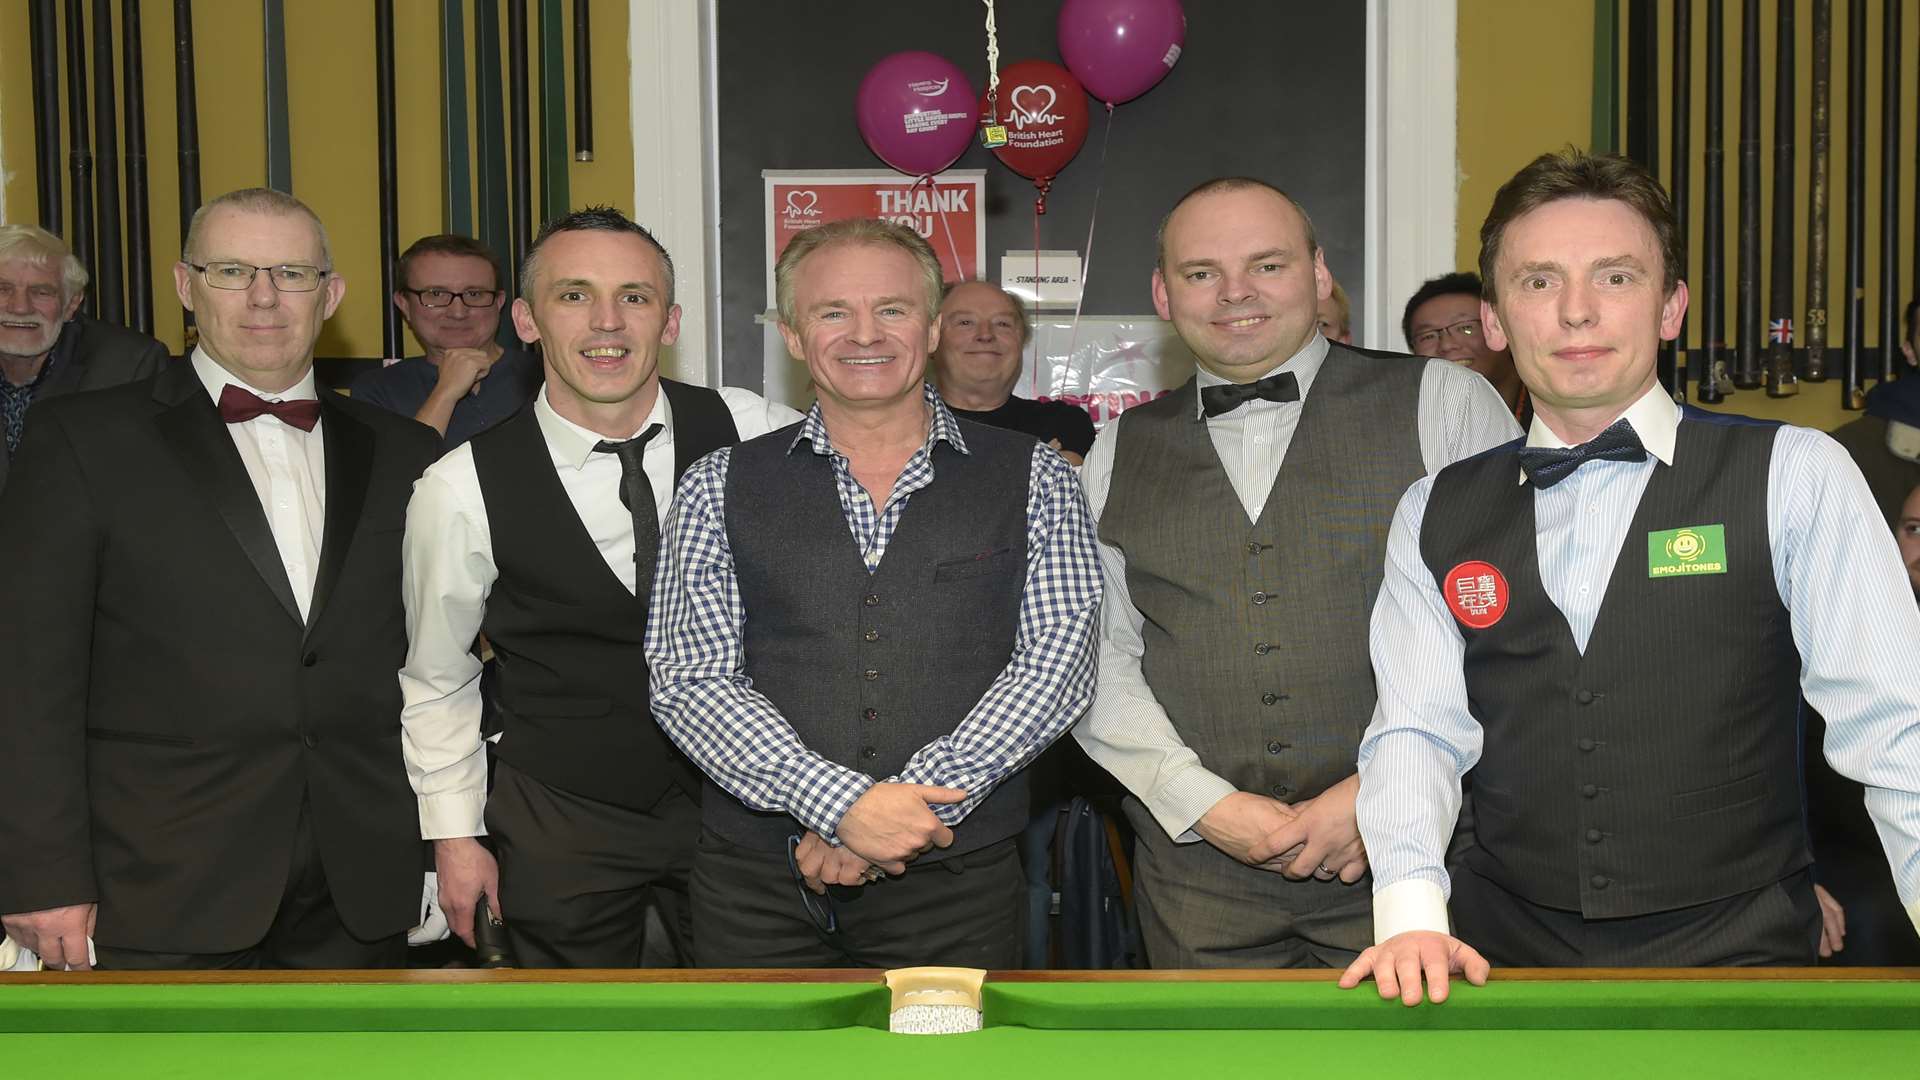 The charity snooker event.